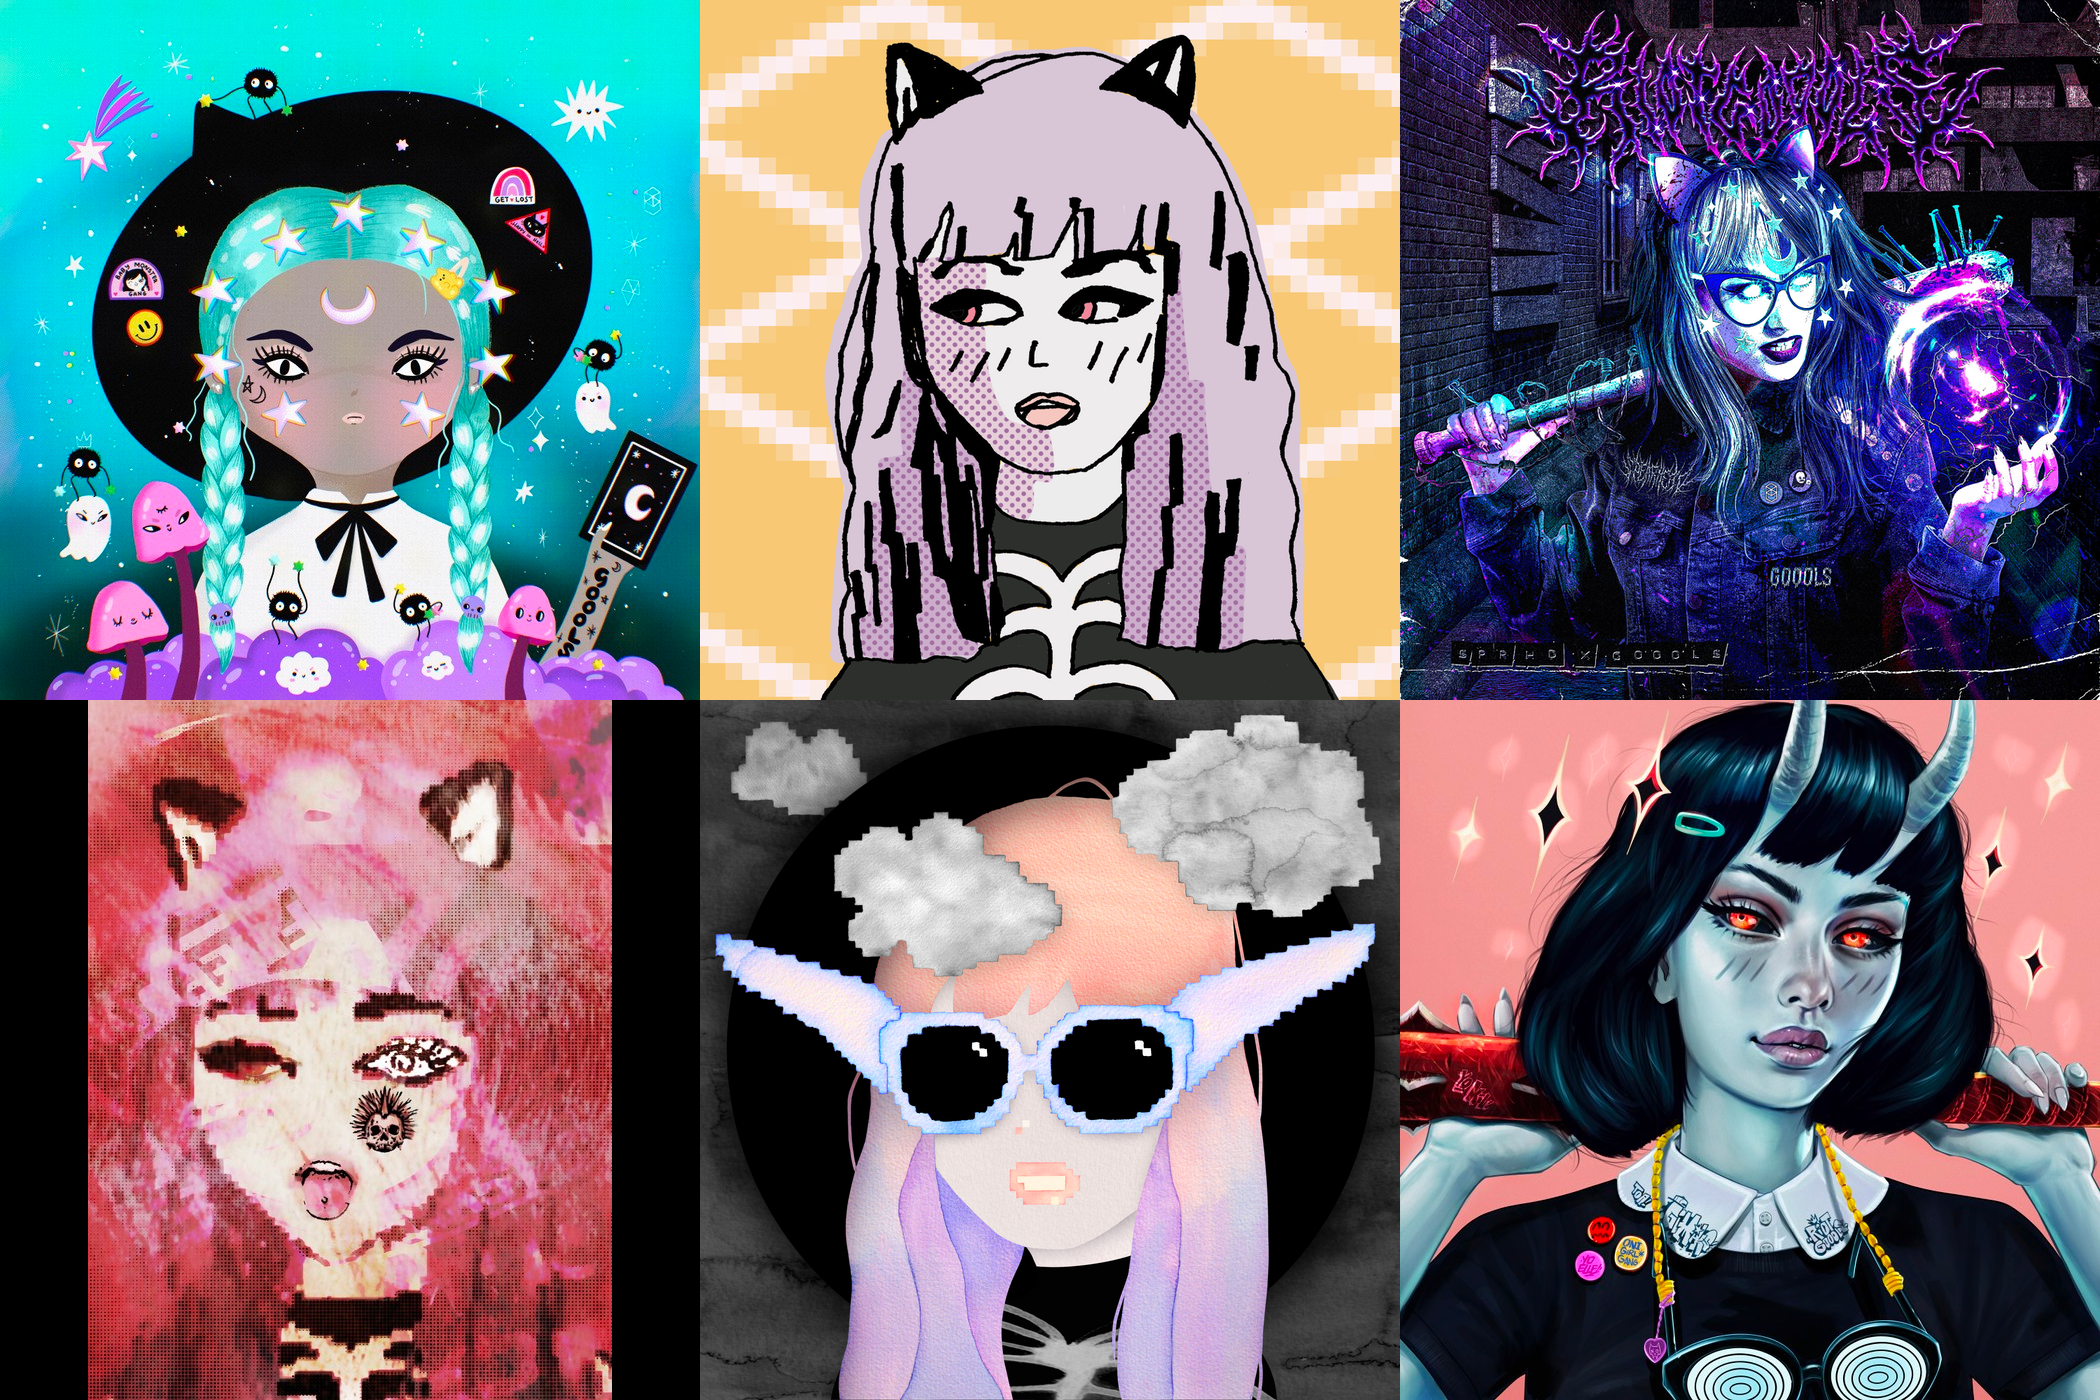 Just some of the beautiful goool inspired art I've managed to buy this year by Cosmic Friend, Koofraa, Spearhead, Chronic Dispositions, Kay Wren, and Gimiks Born